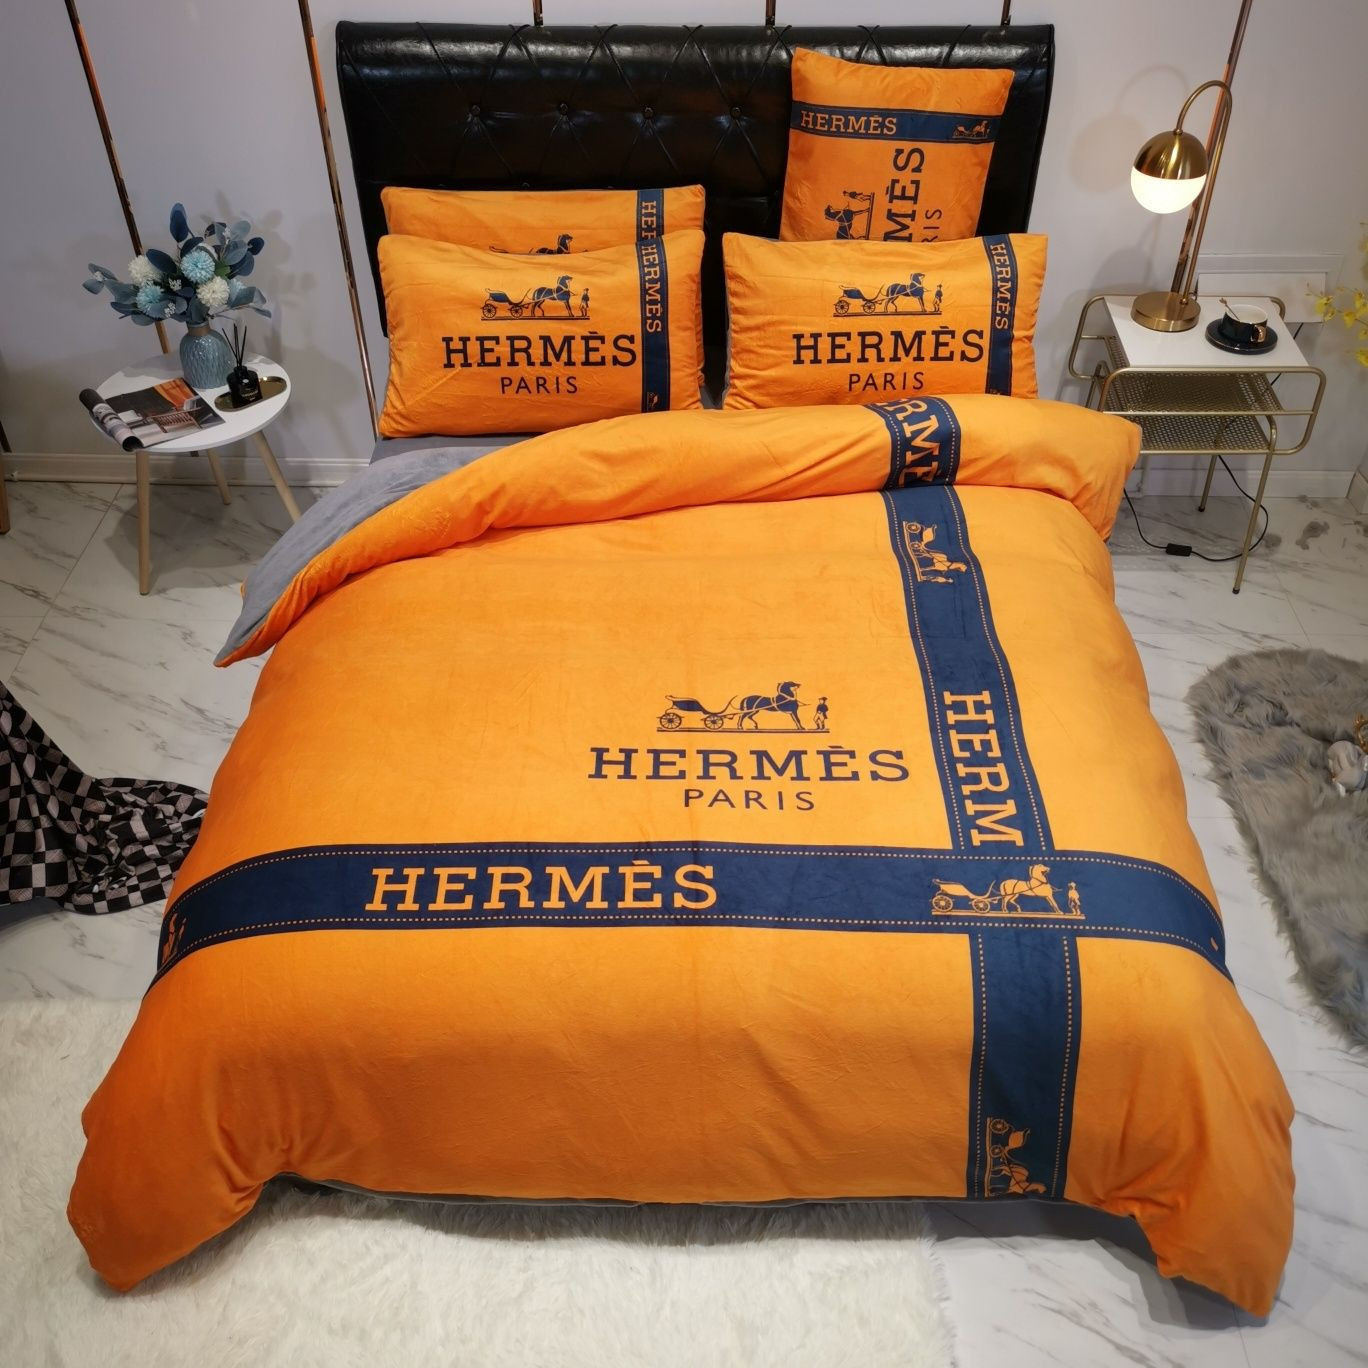 Hermes Paris Luxury Brand Type Bedding Sets 001 - Find things you'll ...